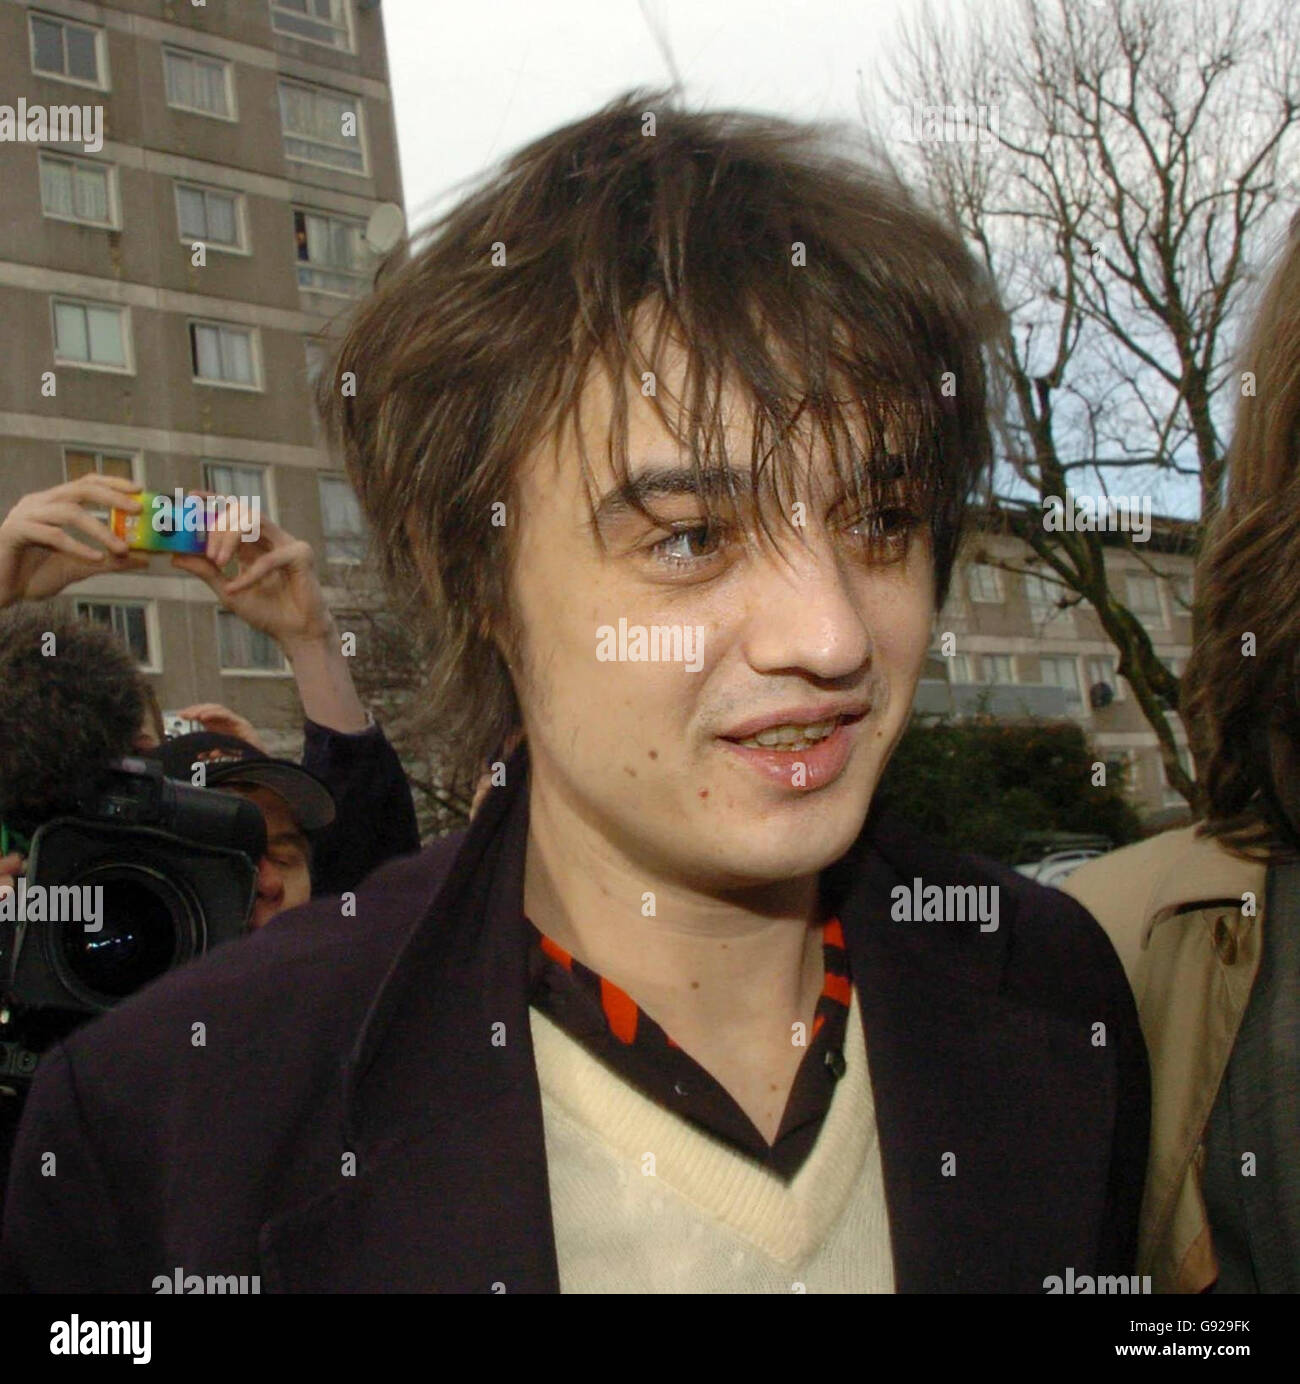 Babyshambles front man Pete Doherty arriving Wednesday January 11, 2006, at Ealing Magistrates Court in west London where he is accused of possession of cocaine and heroin. The 26-year-old singer, whose on-off relationship with supermodel Kate Moss has seen him hit the headlines, was arrested on November 30. See PA story COURTS Doherty. PRESS ASSOCIATION Photo. Photo credit should read: Johnny Green / PA. Stock Photo